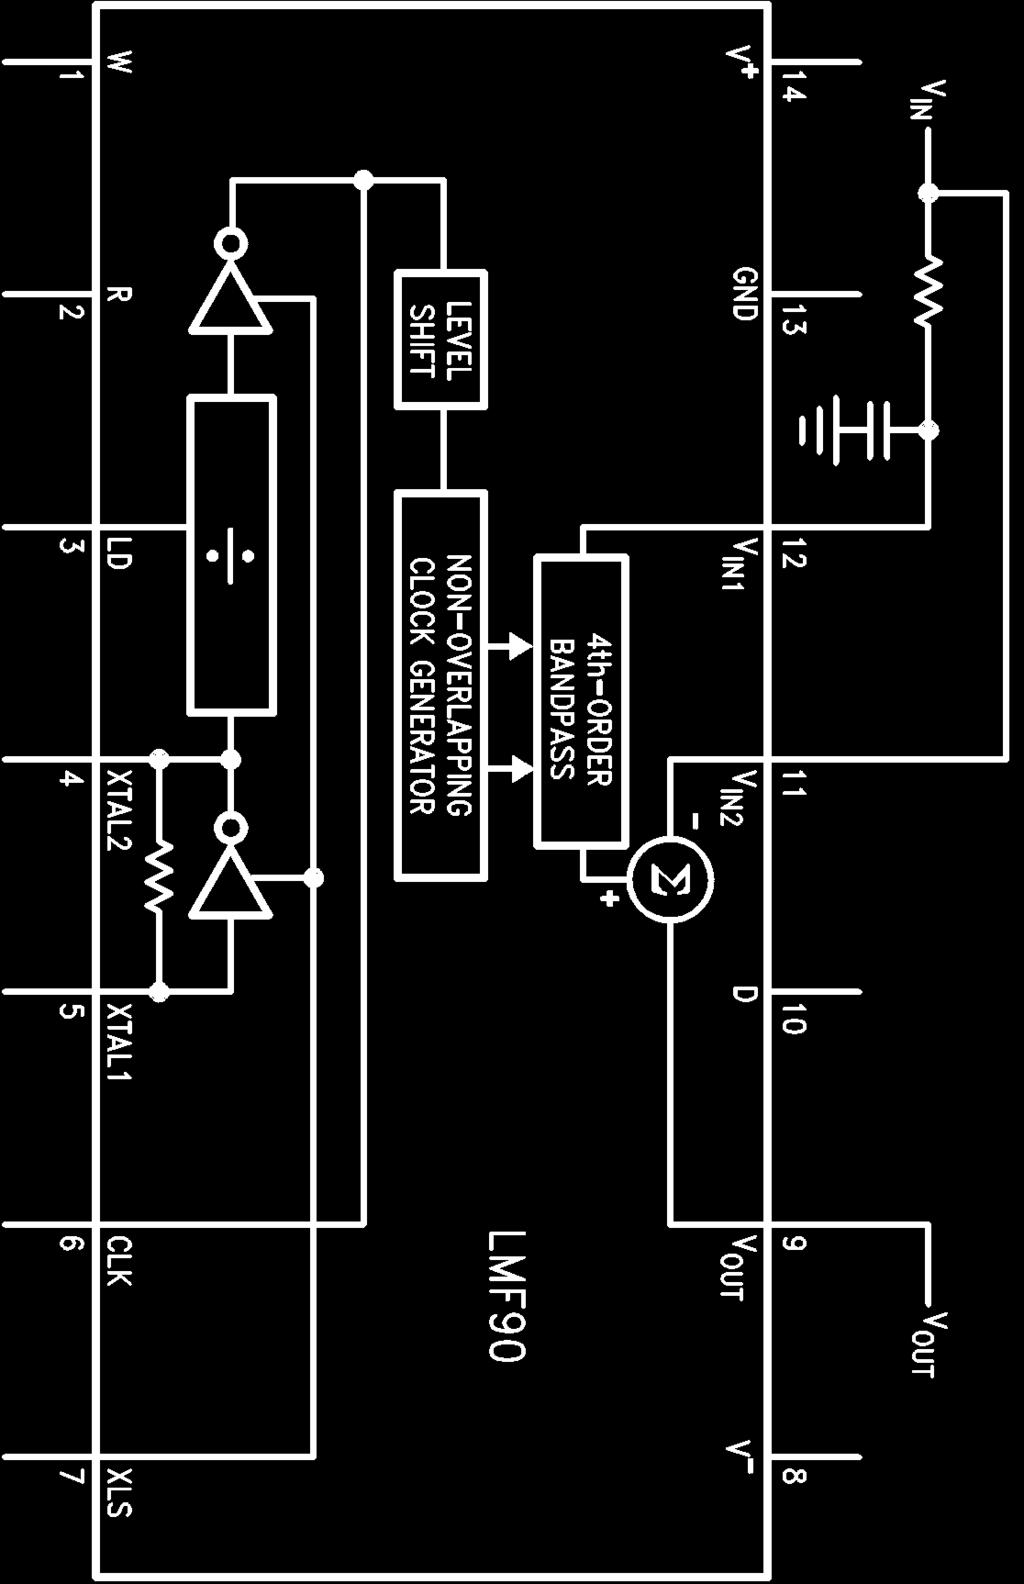 may be necessary to use a bandwidth limiting filter (often a simple passive RC low-pass) ahead of the bandpass input Although the summing amplifier uses switched-capacitor techniques it does not